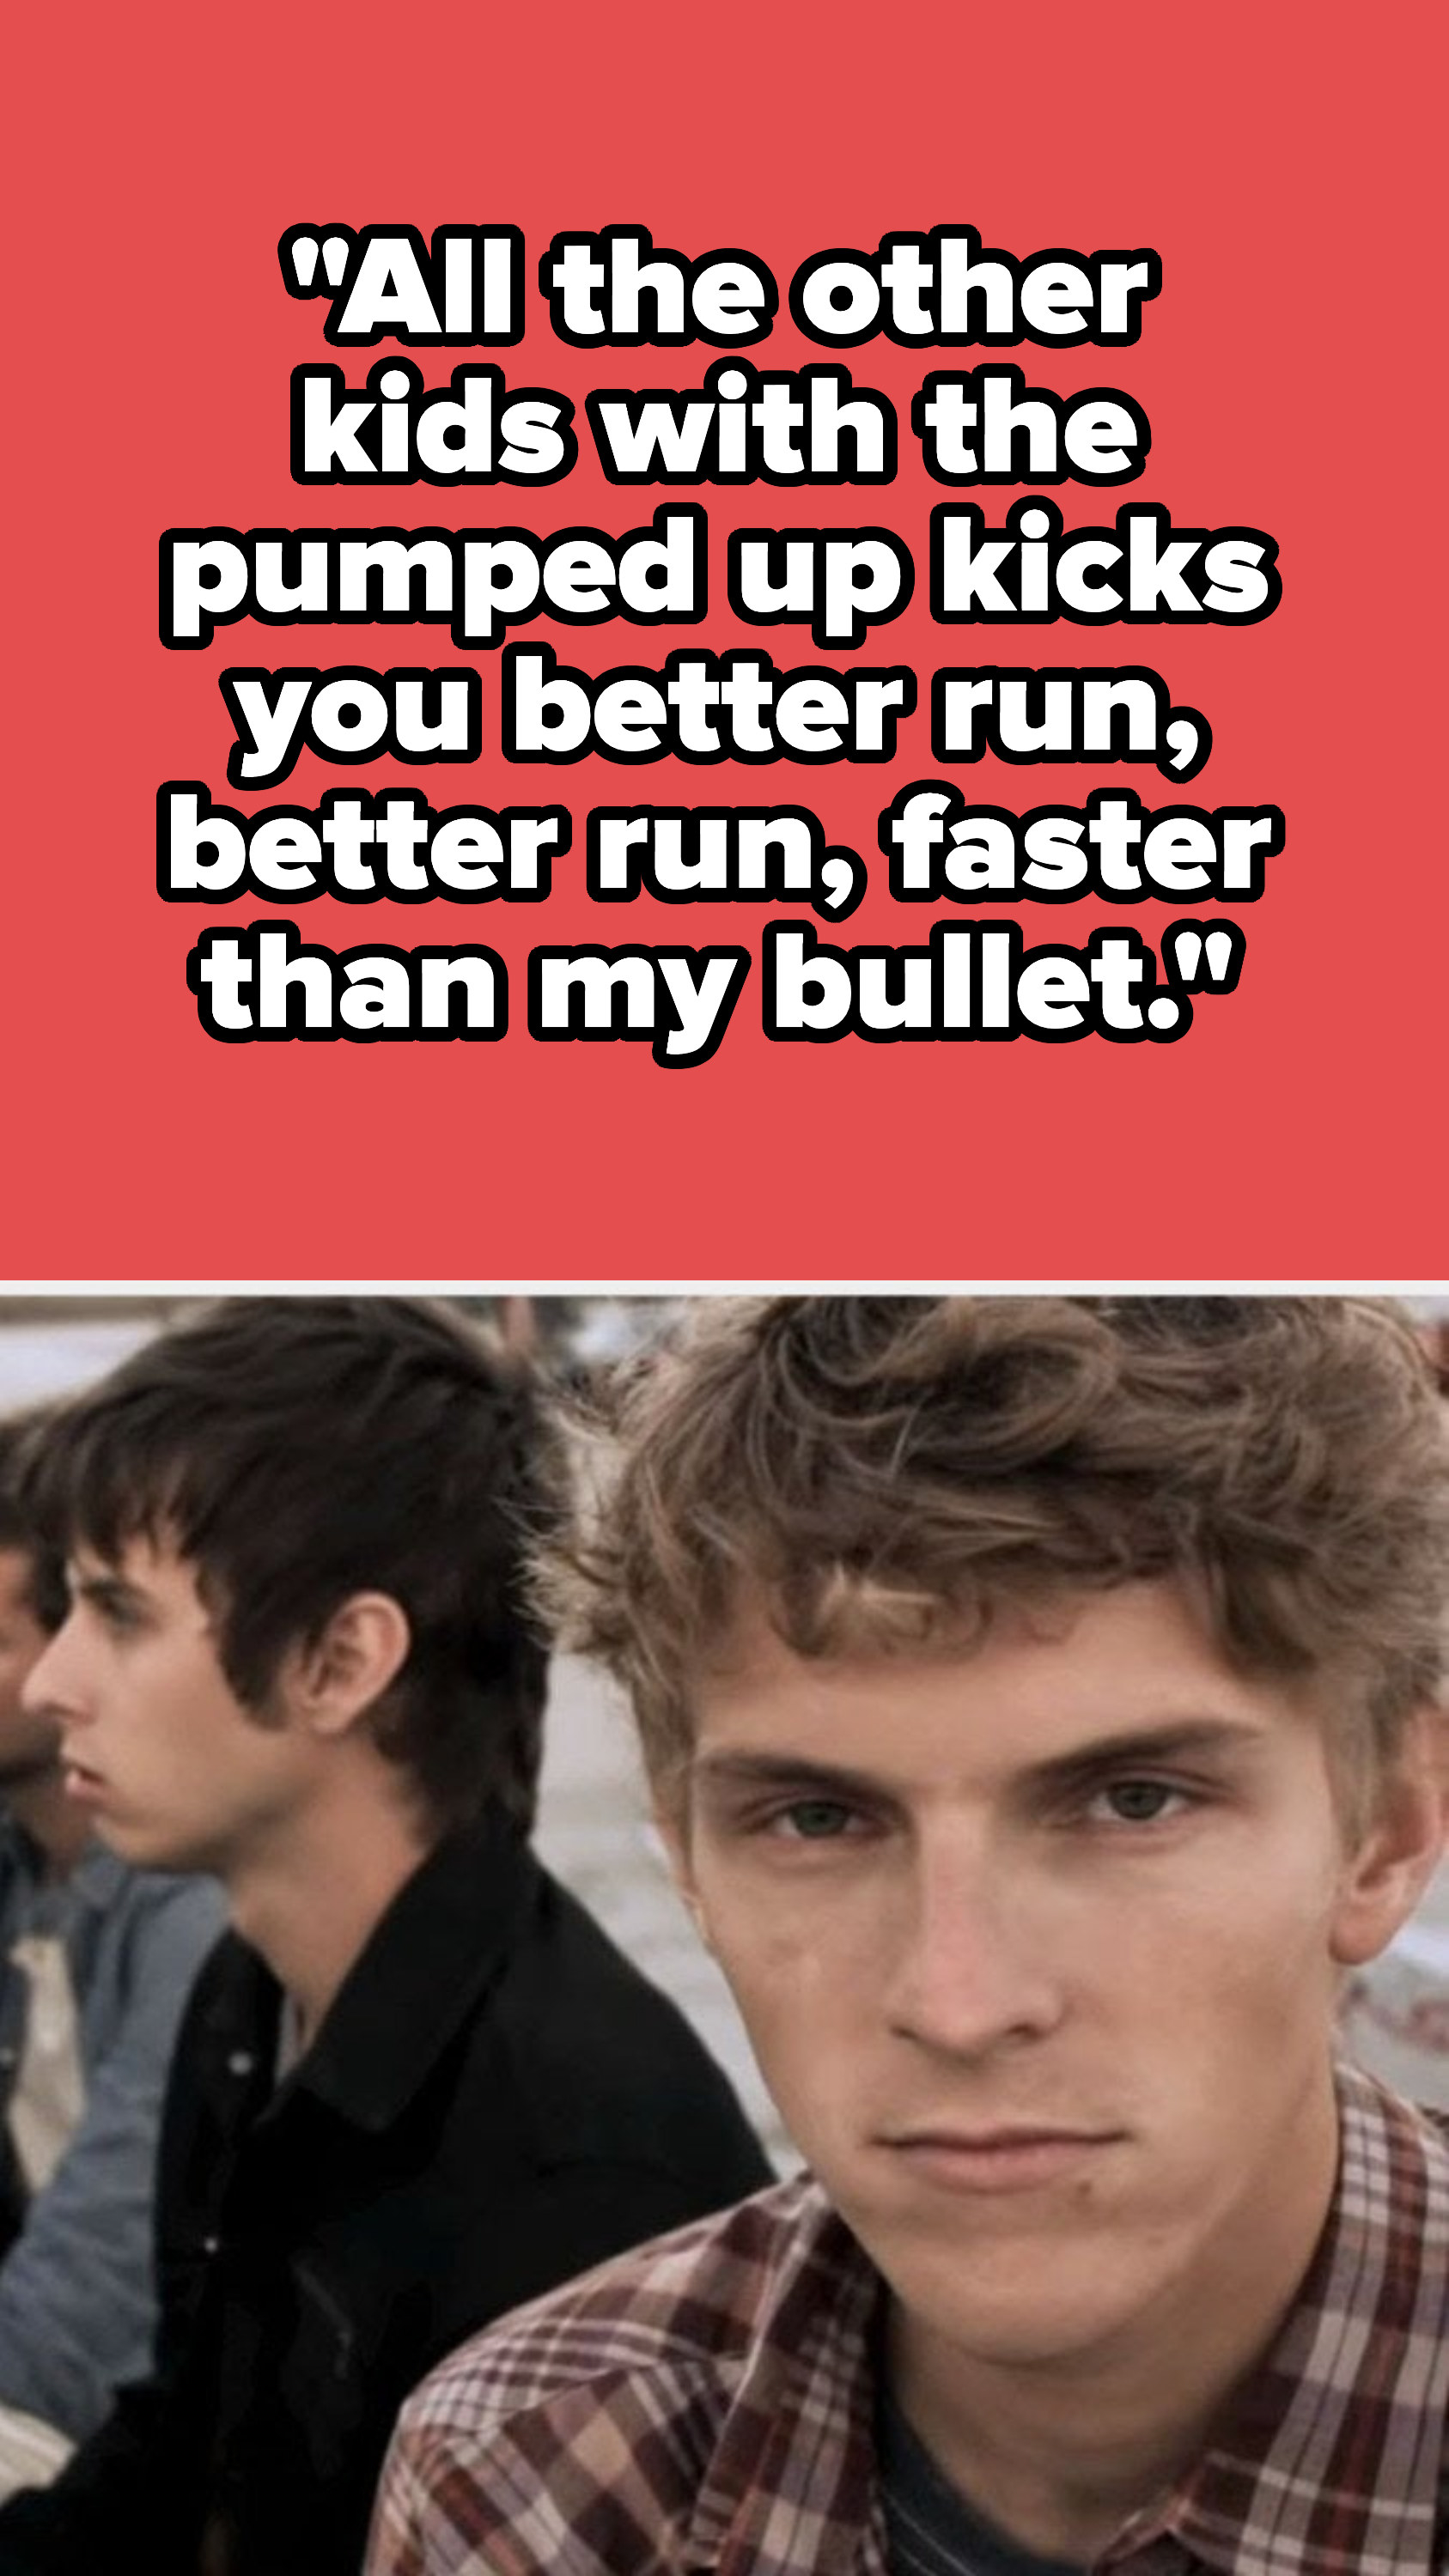 Foster the People lyrics: &quot;All the other kids with the pumped up kicks you better run, better run, faster than my bullet&quot;